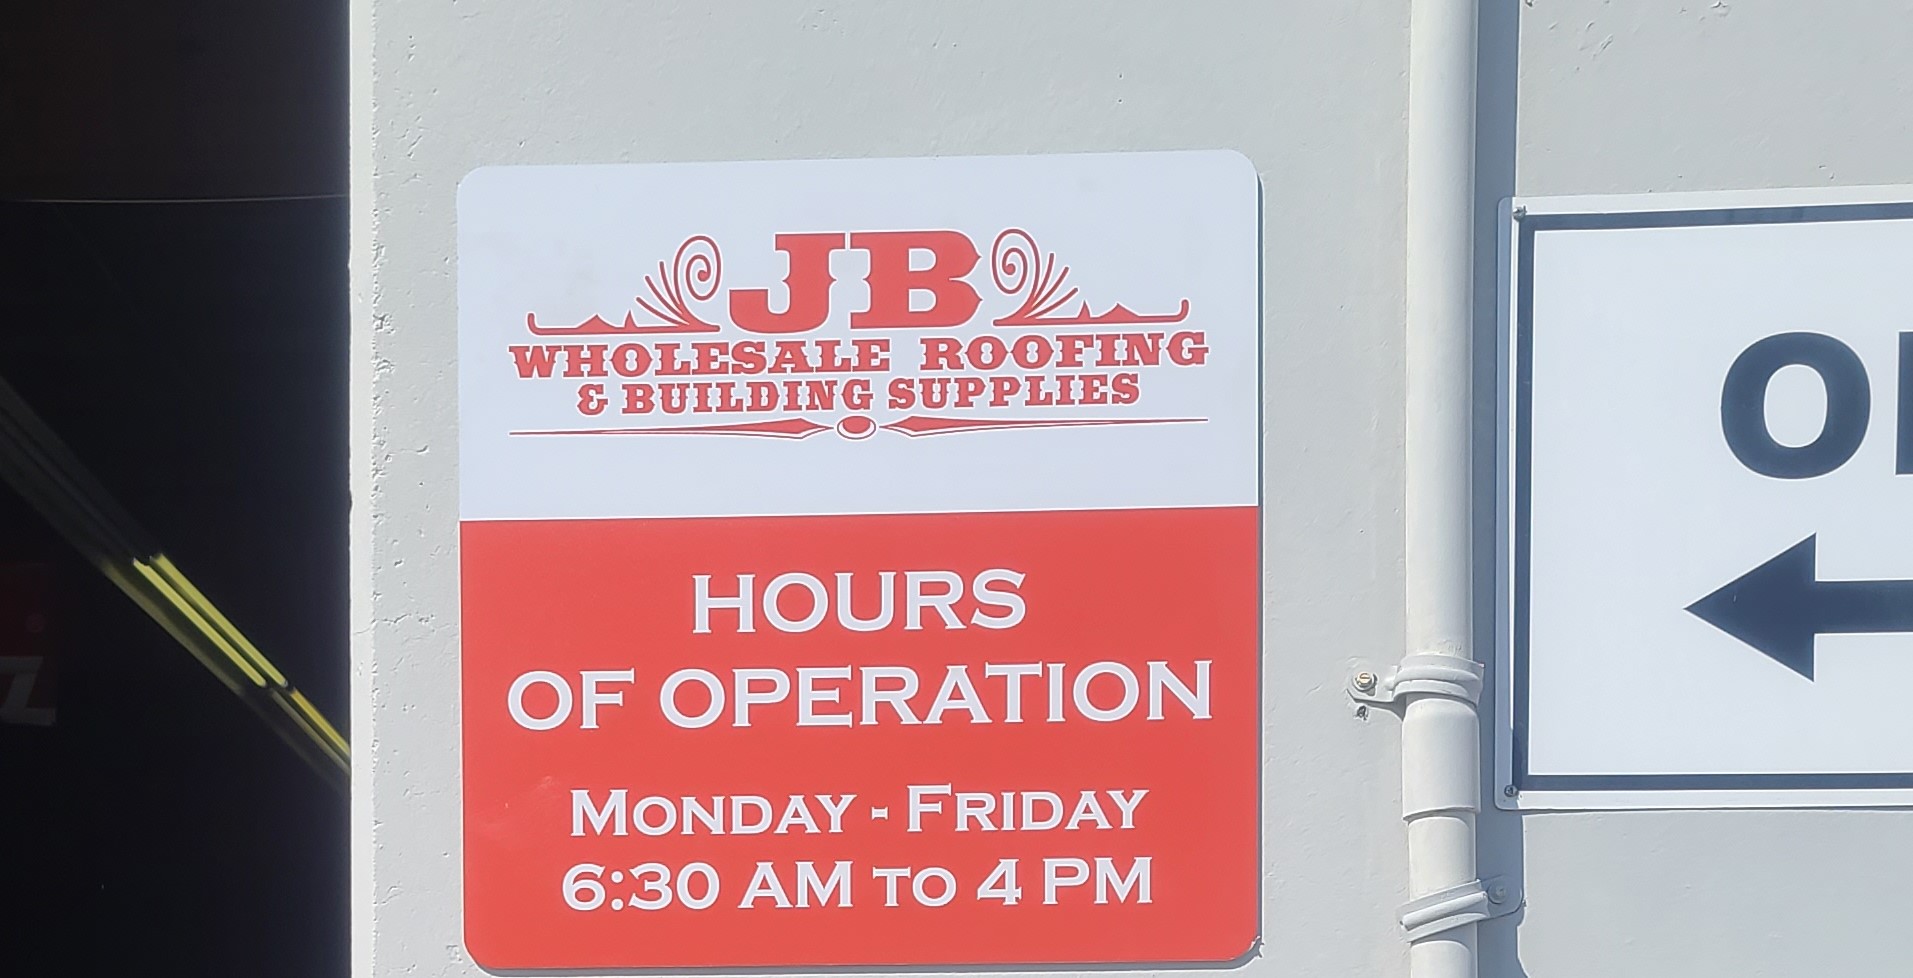 Our sign package for JB Wholesale includes more maxmetal outdoor signs for their Riverside branch. These include a building sign and directional pole signs.